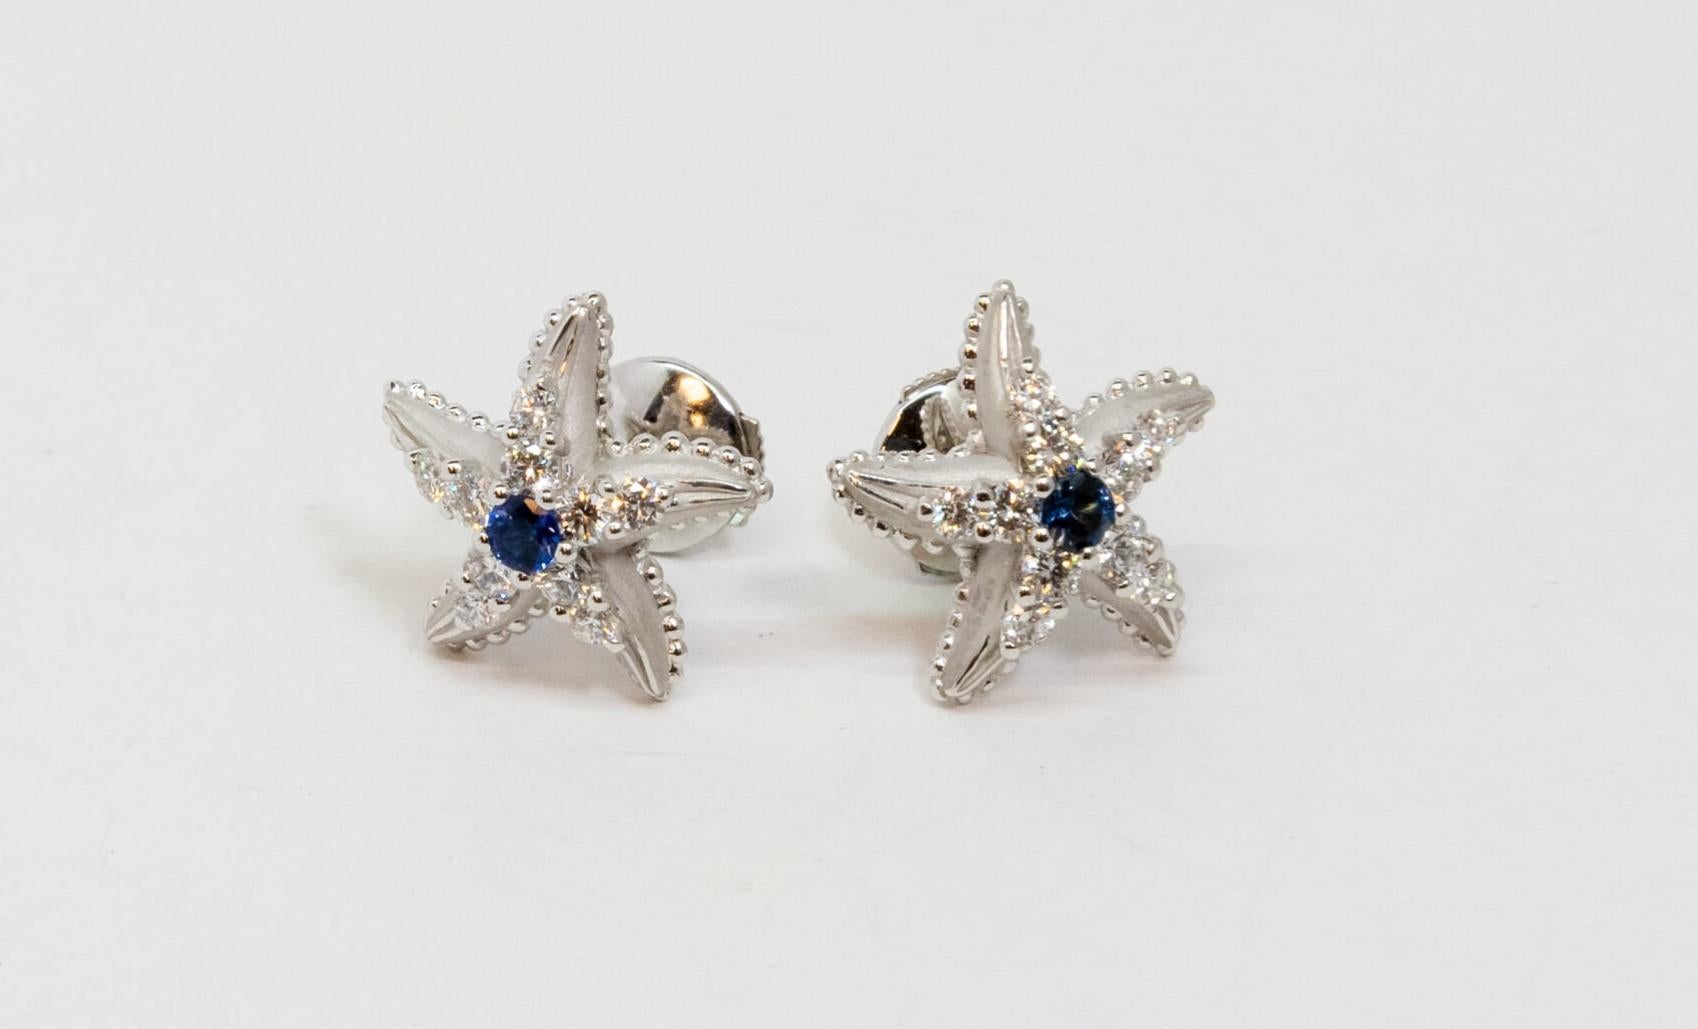 18K White Gold stud earring. It is star-shaped earrings set Blue Sapphire main stone (~0.22ct) and 10 Diamonds around (~0.57ct). Push back.

Dimensions: 1.7 cm x 1.7 cm